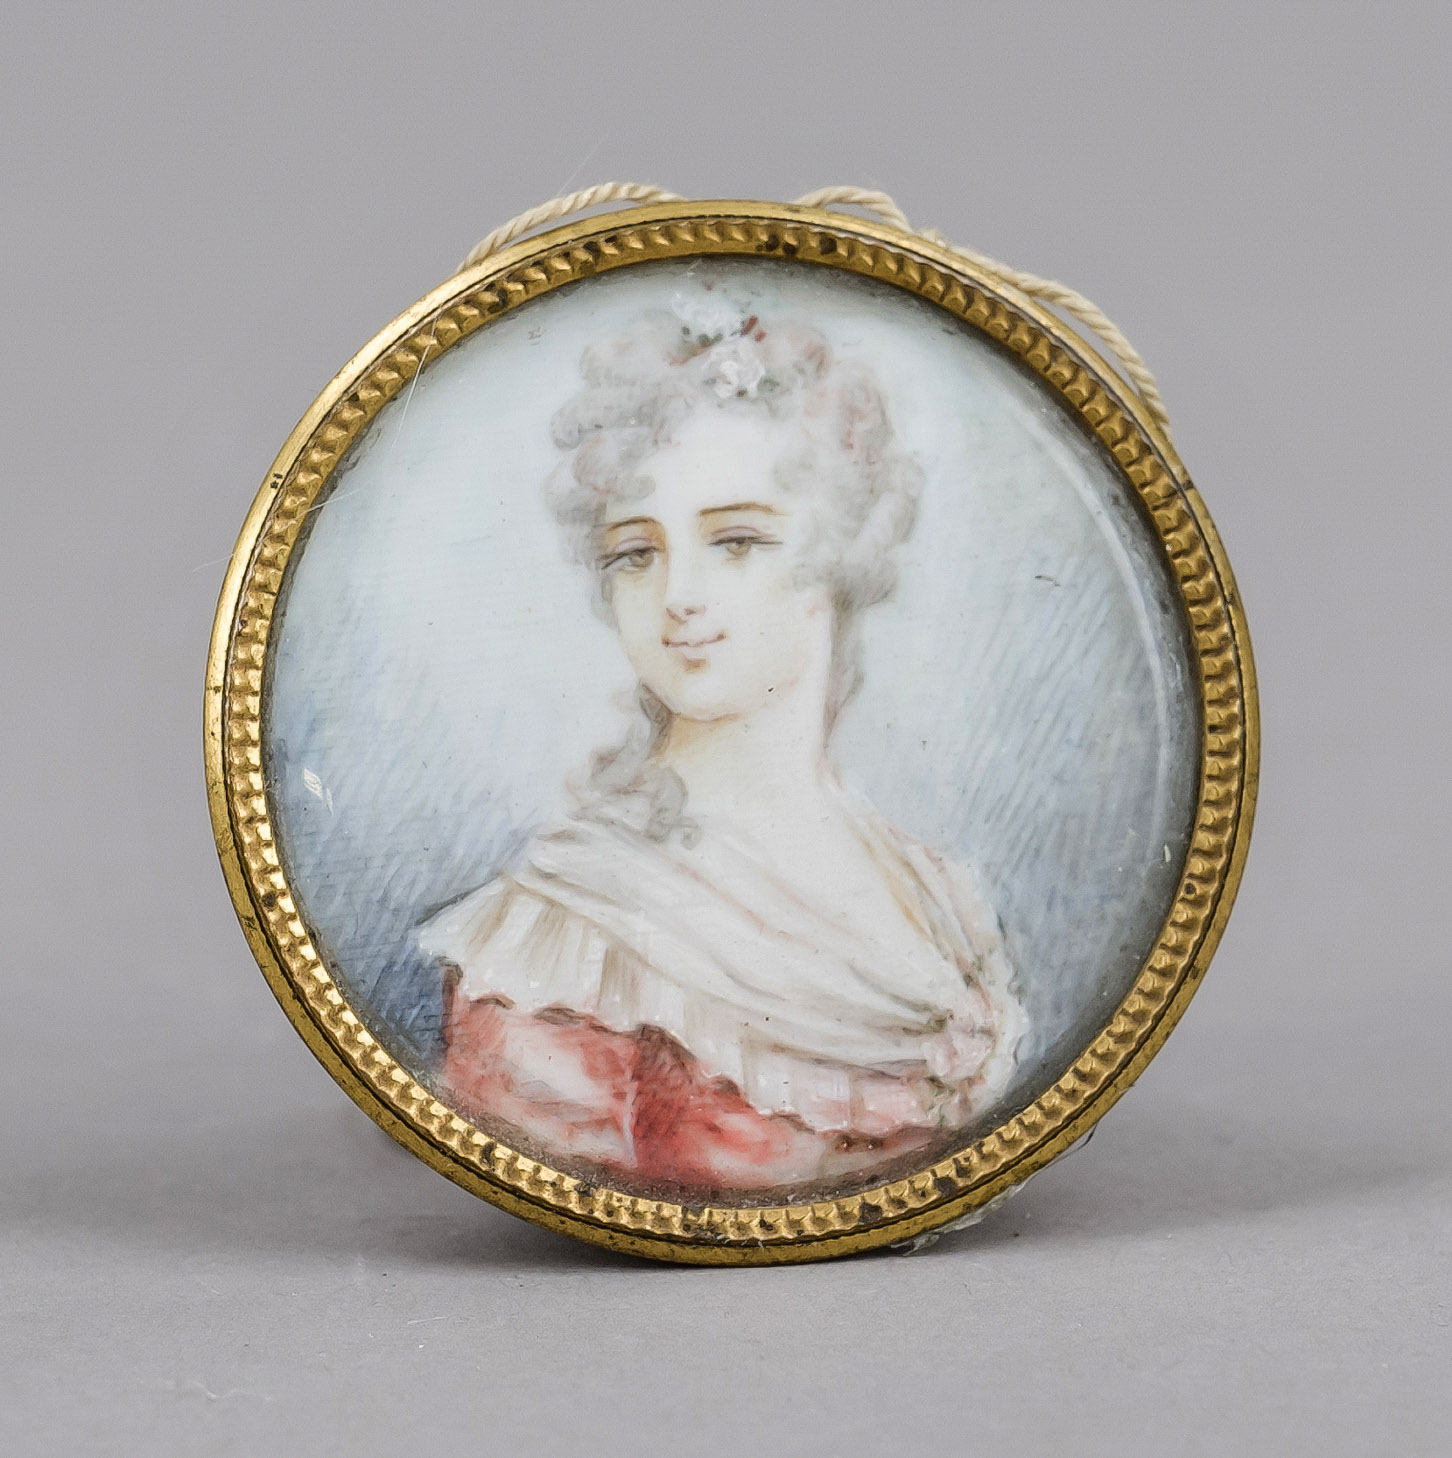 Small round miniature, 19th century, polychrome tempera painting on bone plate. Young woman in a